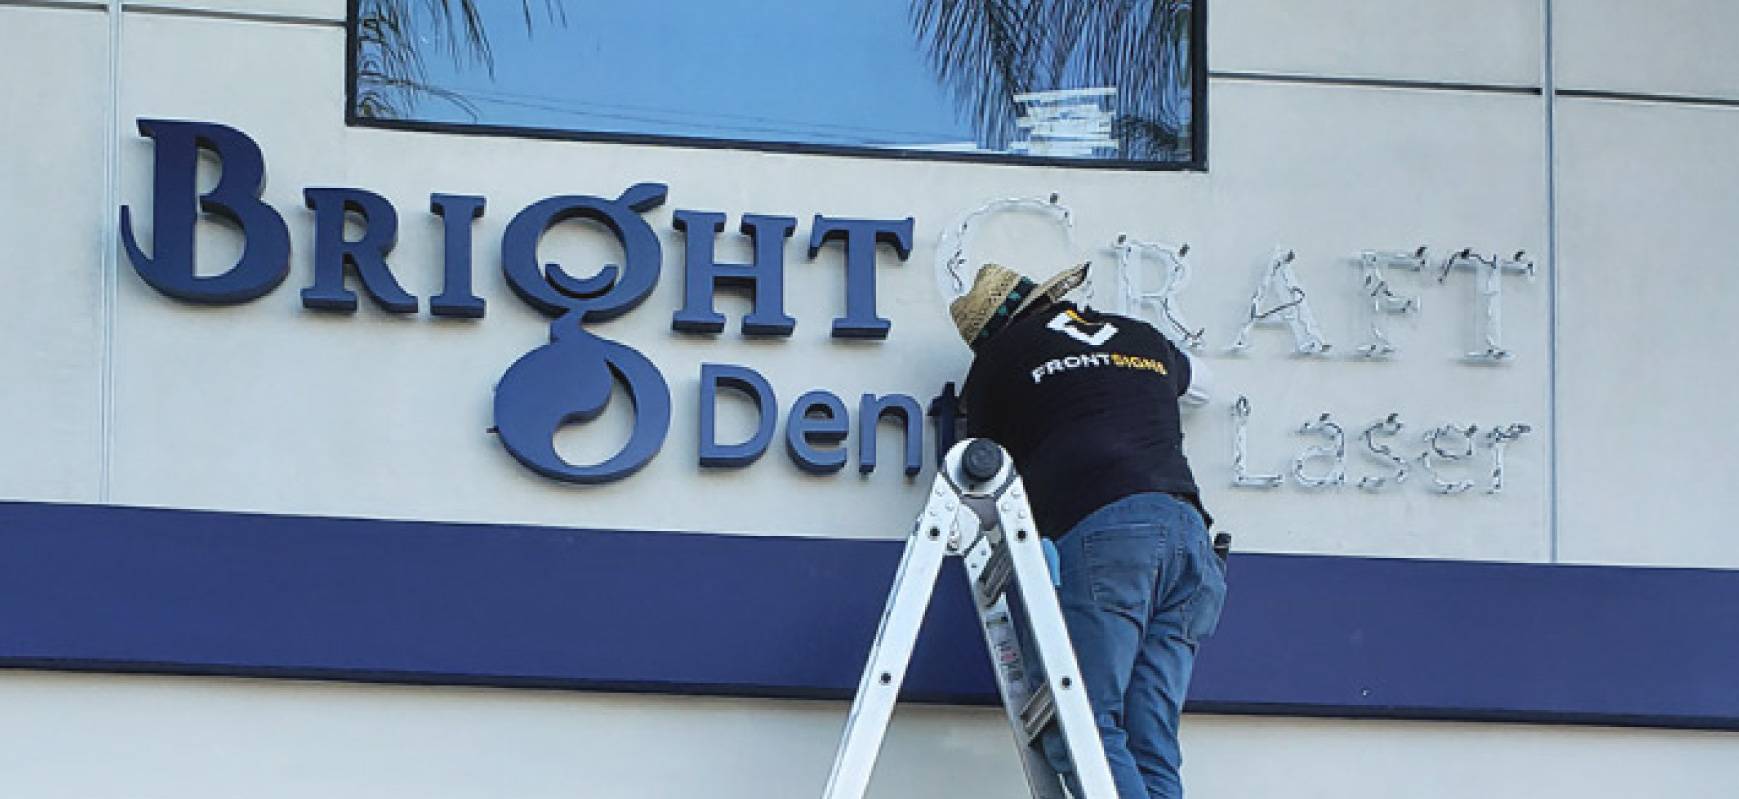 Bright Craft Dental and Laser sign installation process on an elevated surface